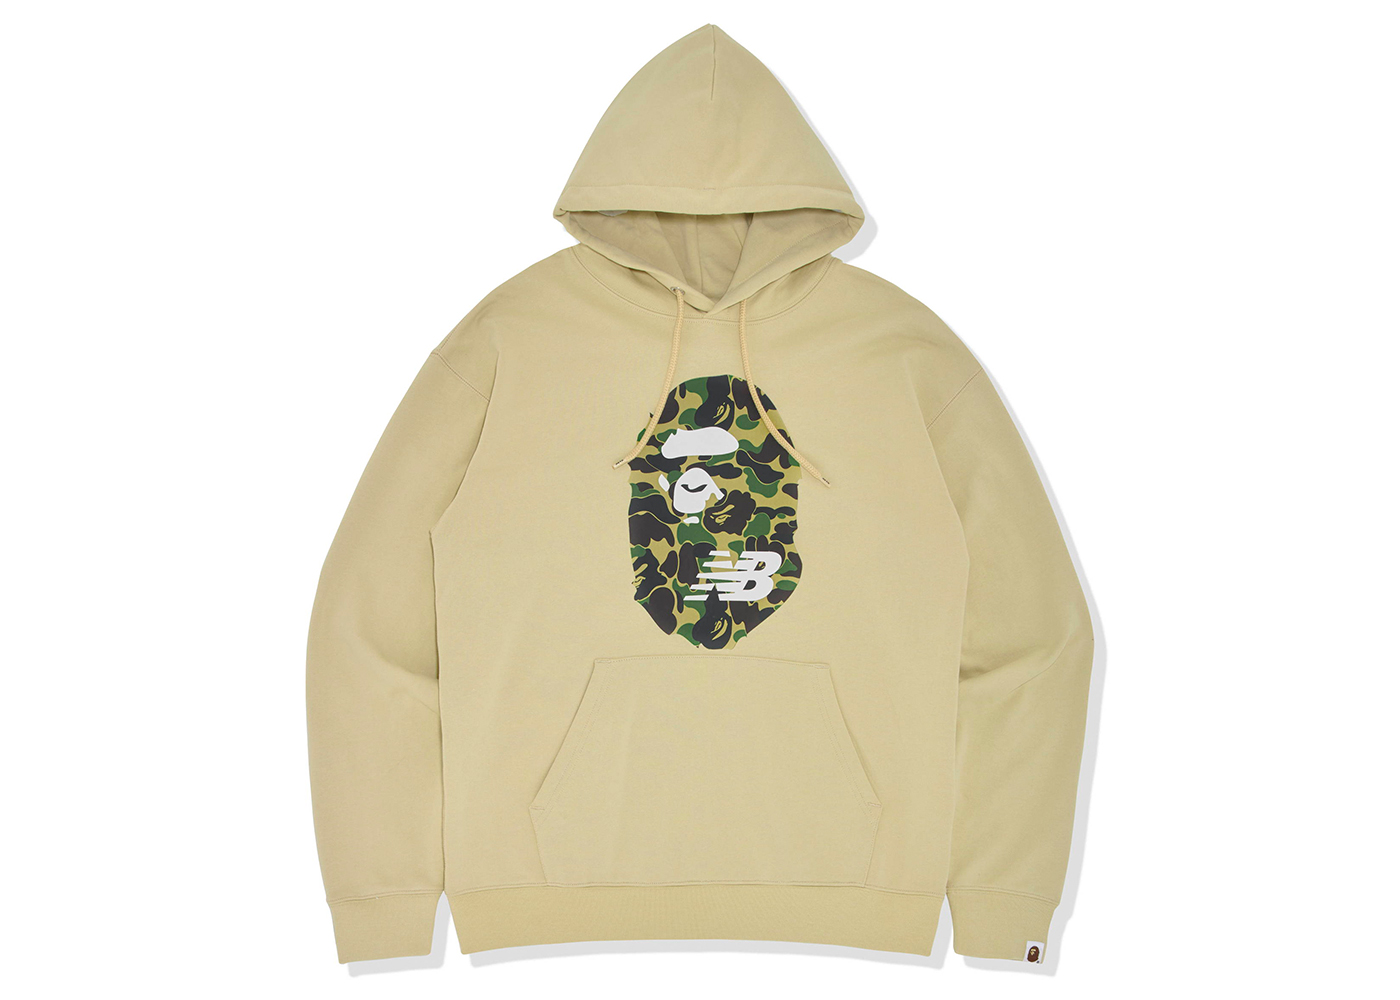 BAPE x New Balance Ape Head Relaxed Fit Pullover Hoodie Beige ...